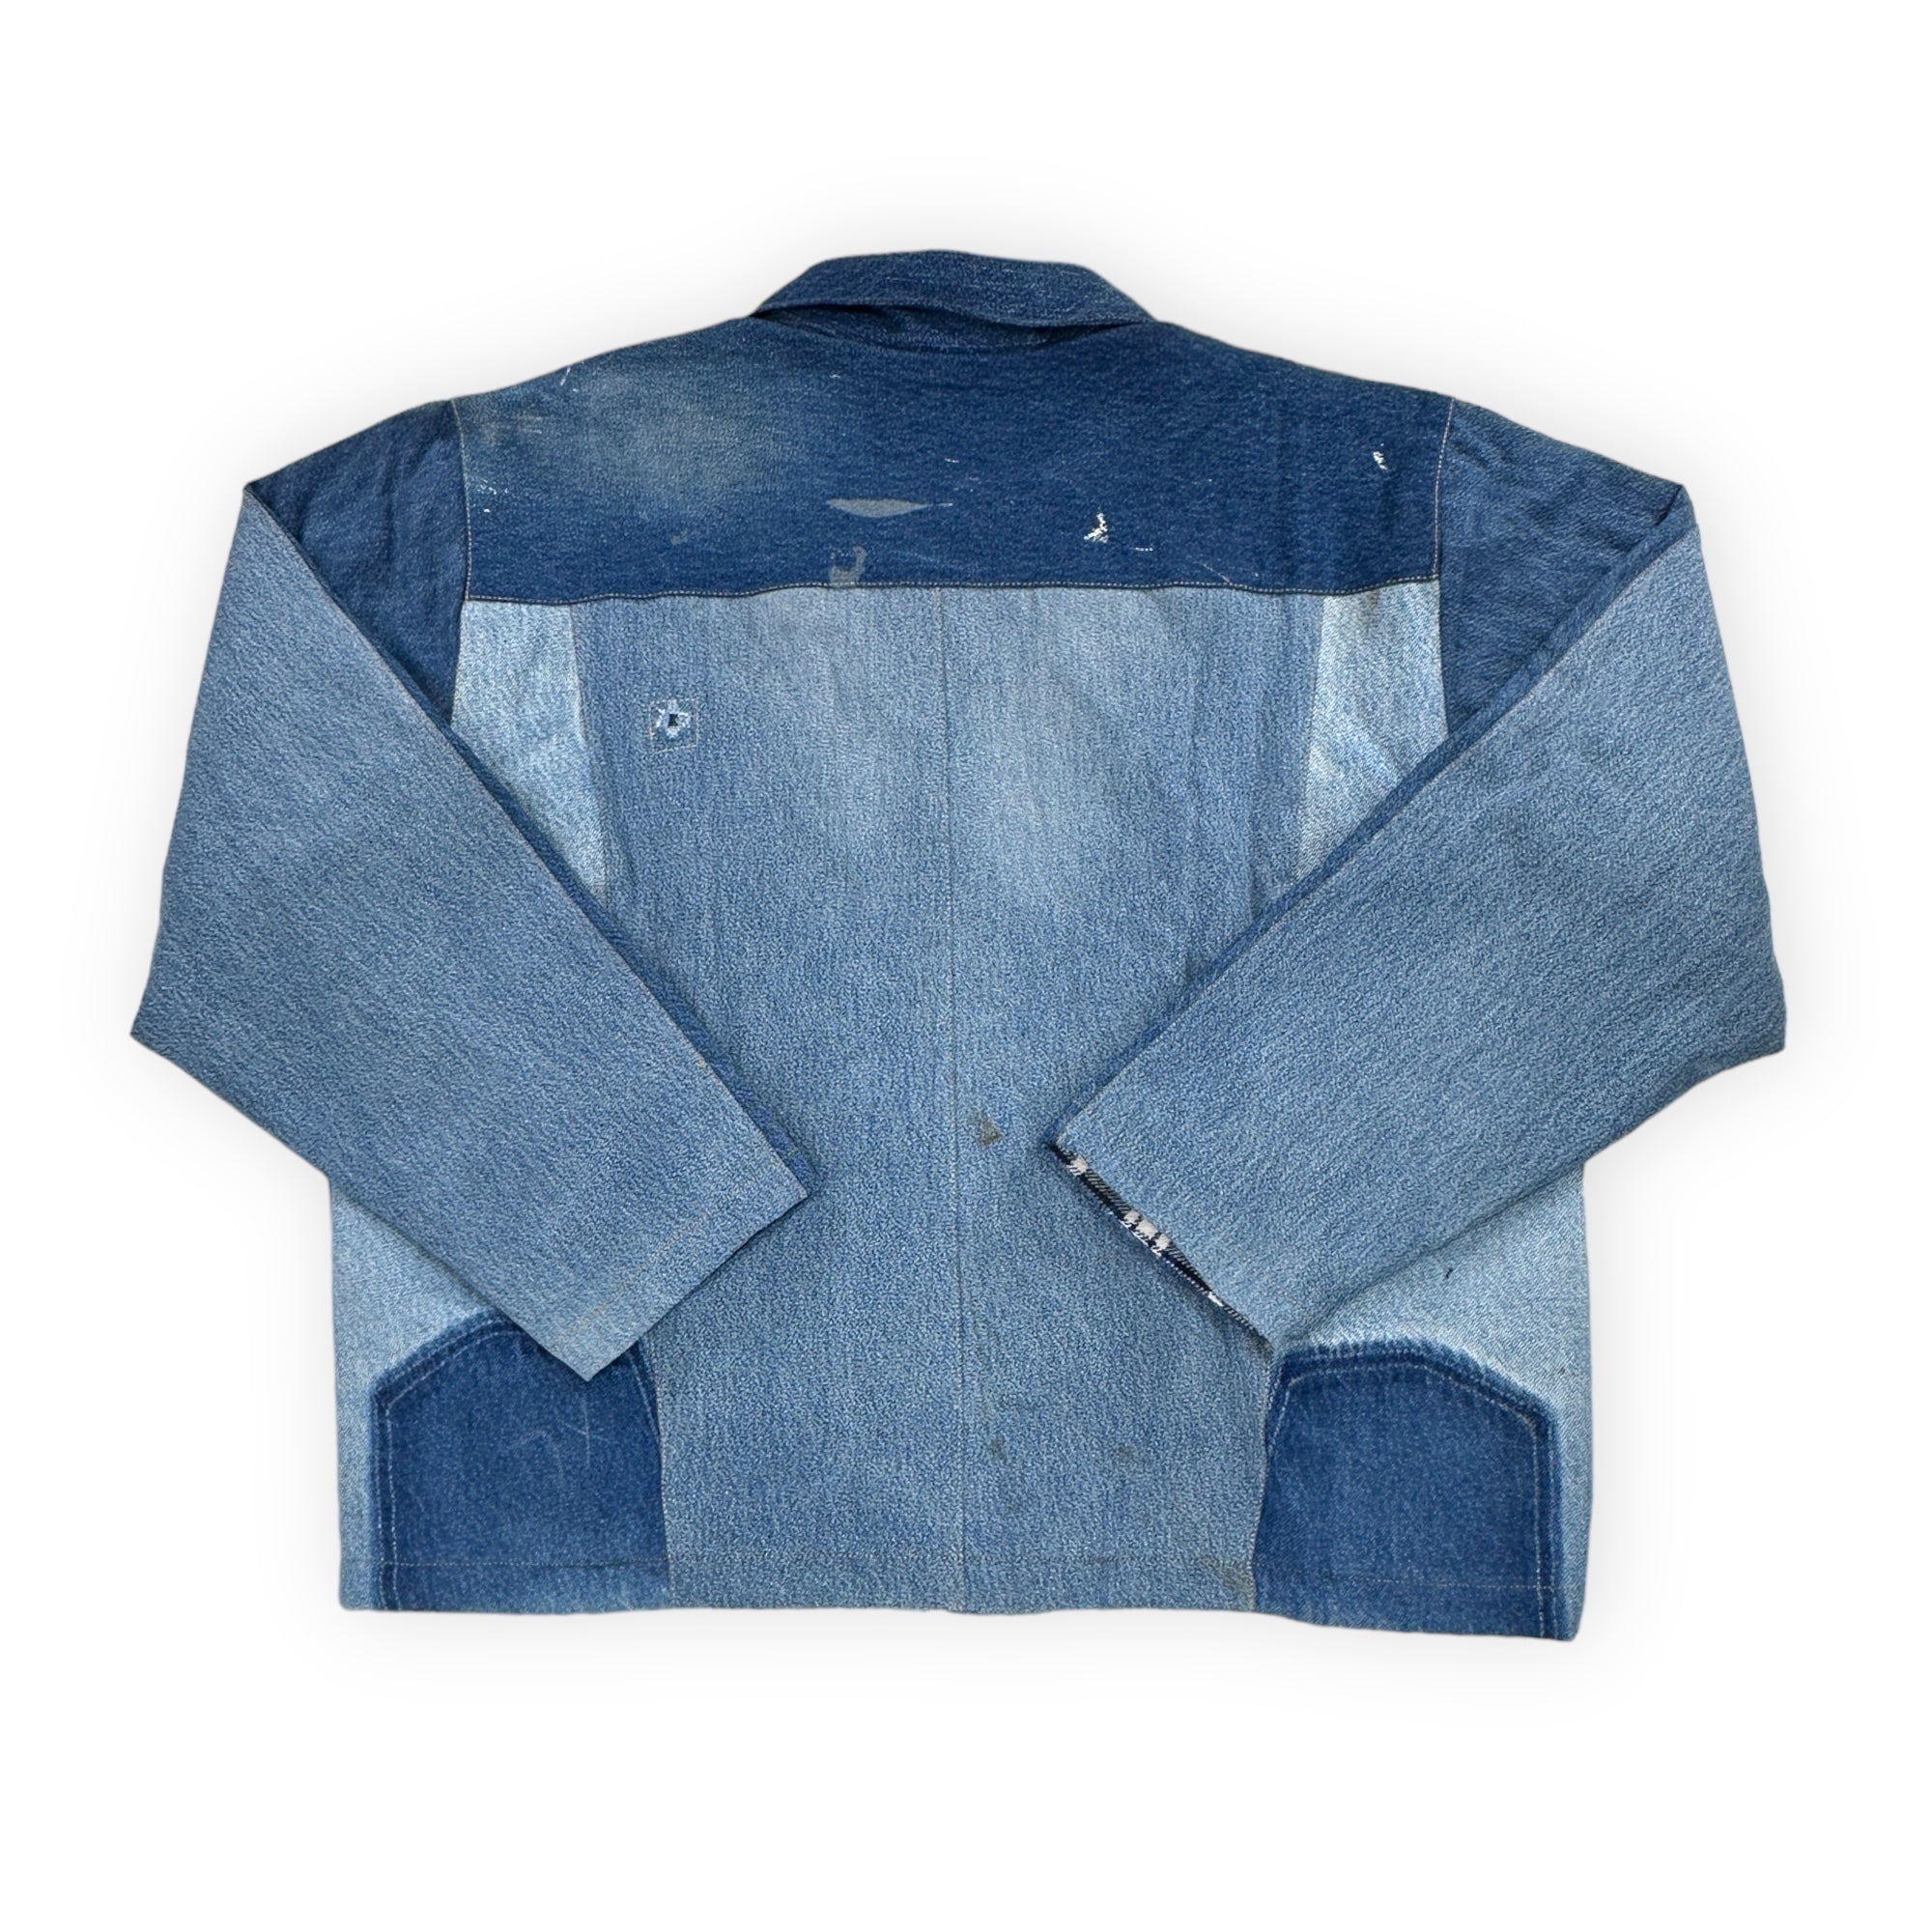 Men's Chore Coat Made From Upcycled Work Jeans - XL - 0